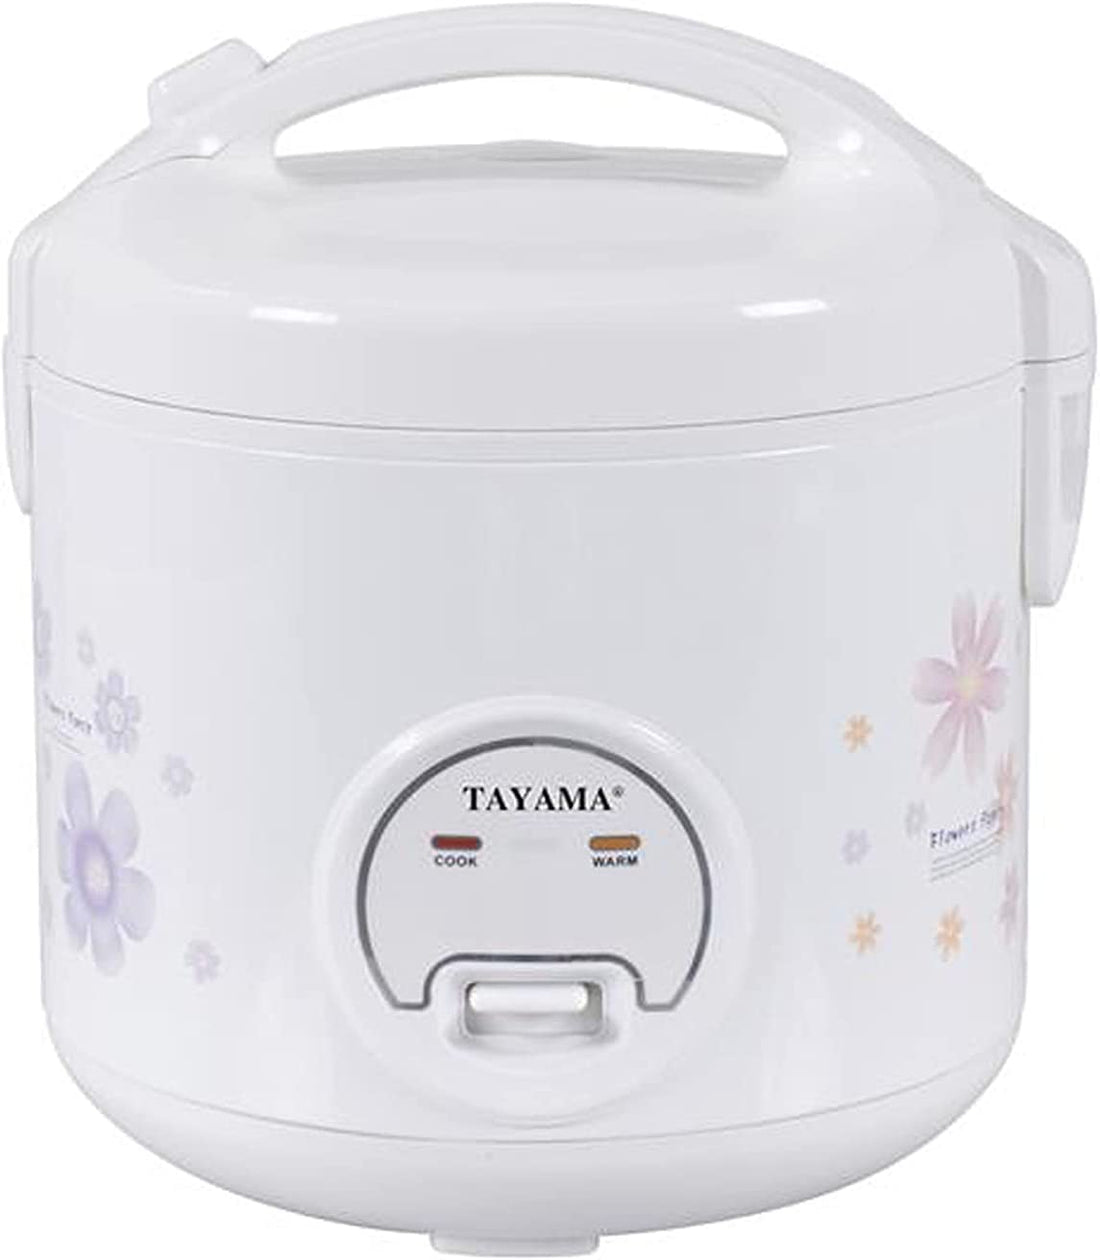 Tayama Automatic Rice Cooker &amp; Food Steamer, 5 Cup